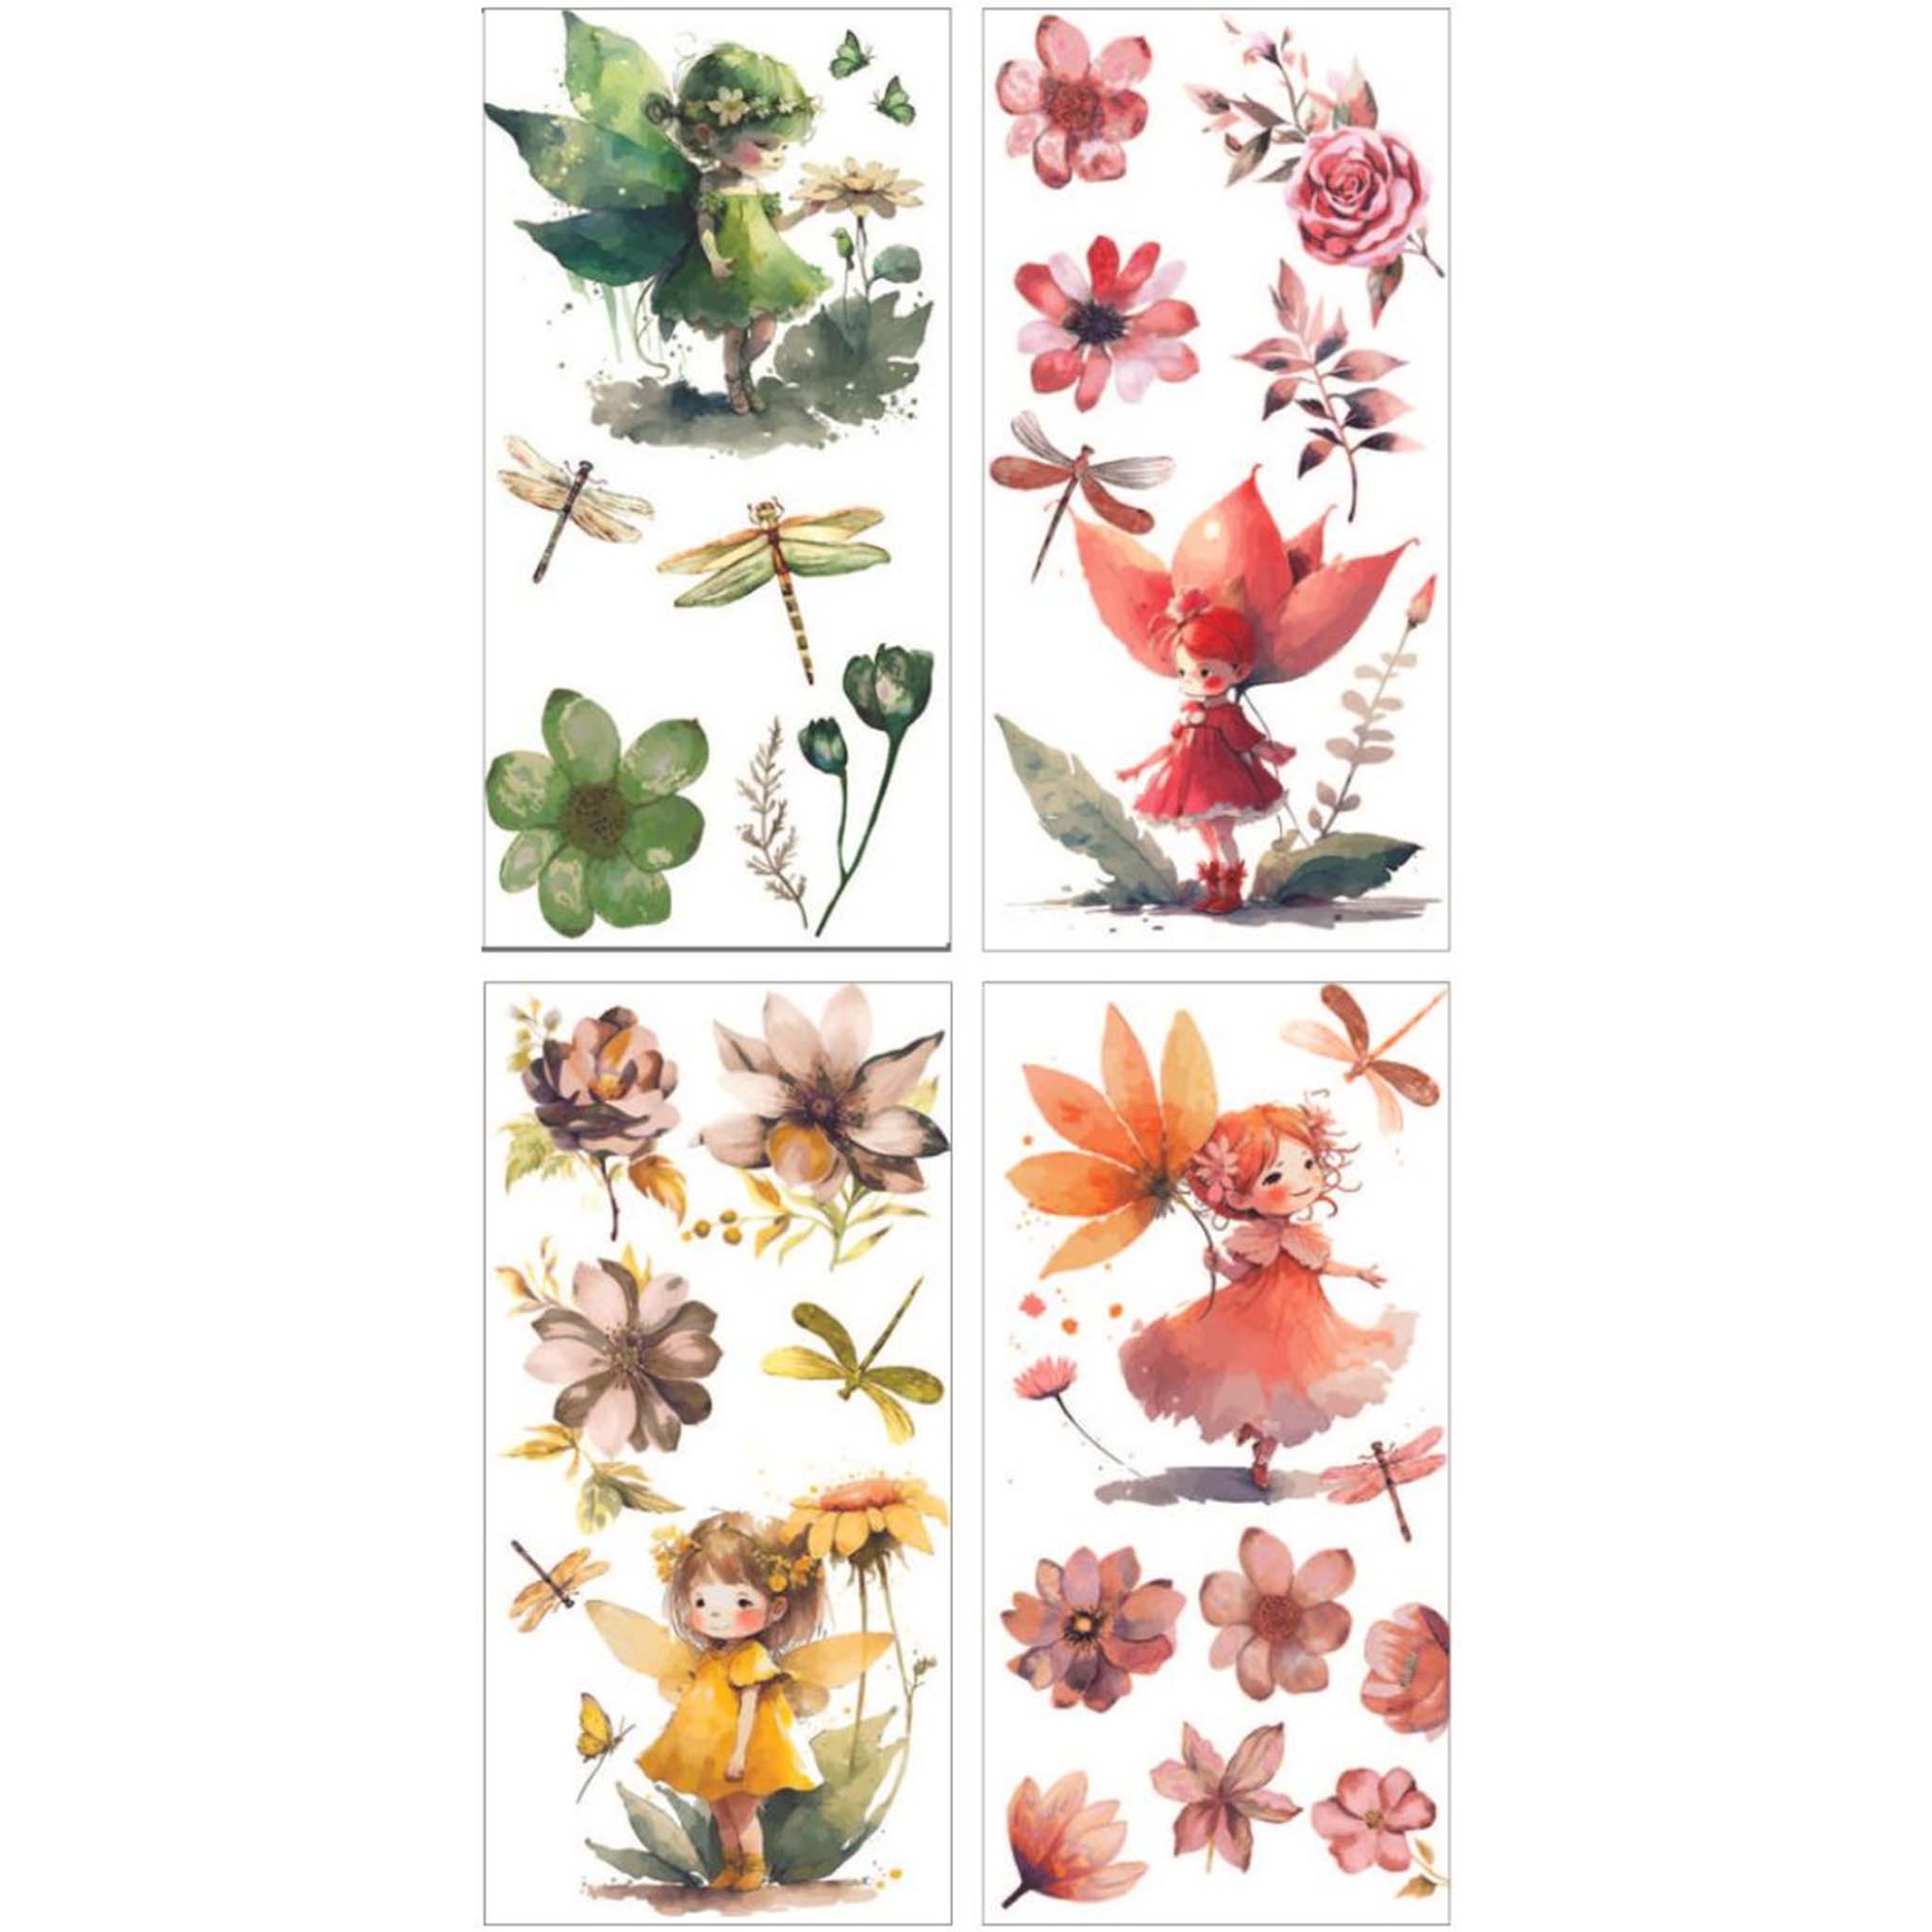 Four sheets of small rub-on transfers that feature fairies and flowers are against a white background. Each sheet features its own colors of green, orange, pink, and yellow.